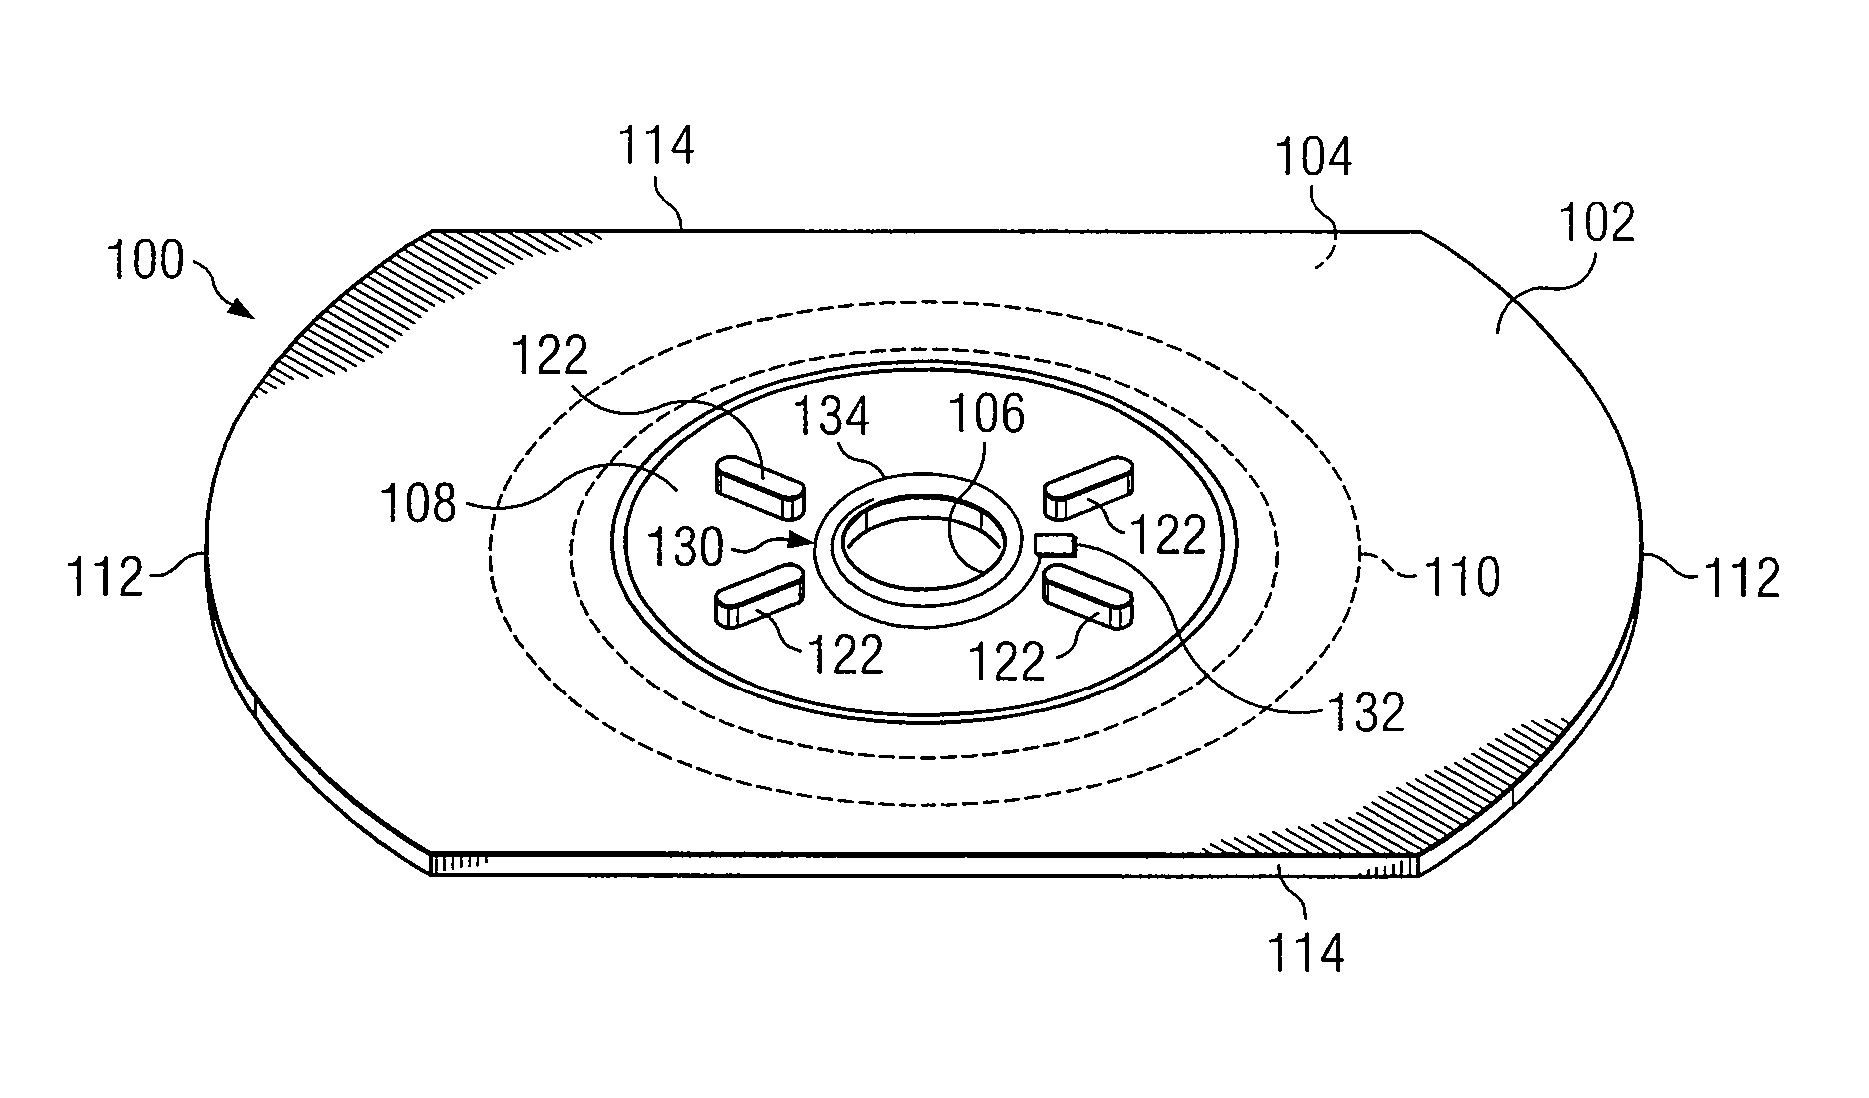 Thin optical disc having remote reading capability